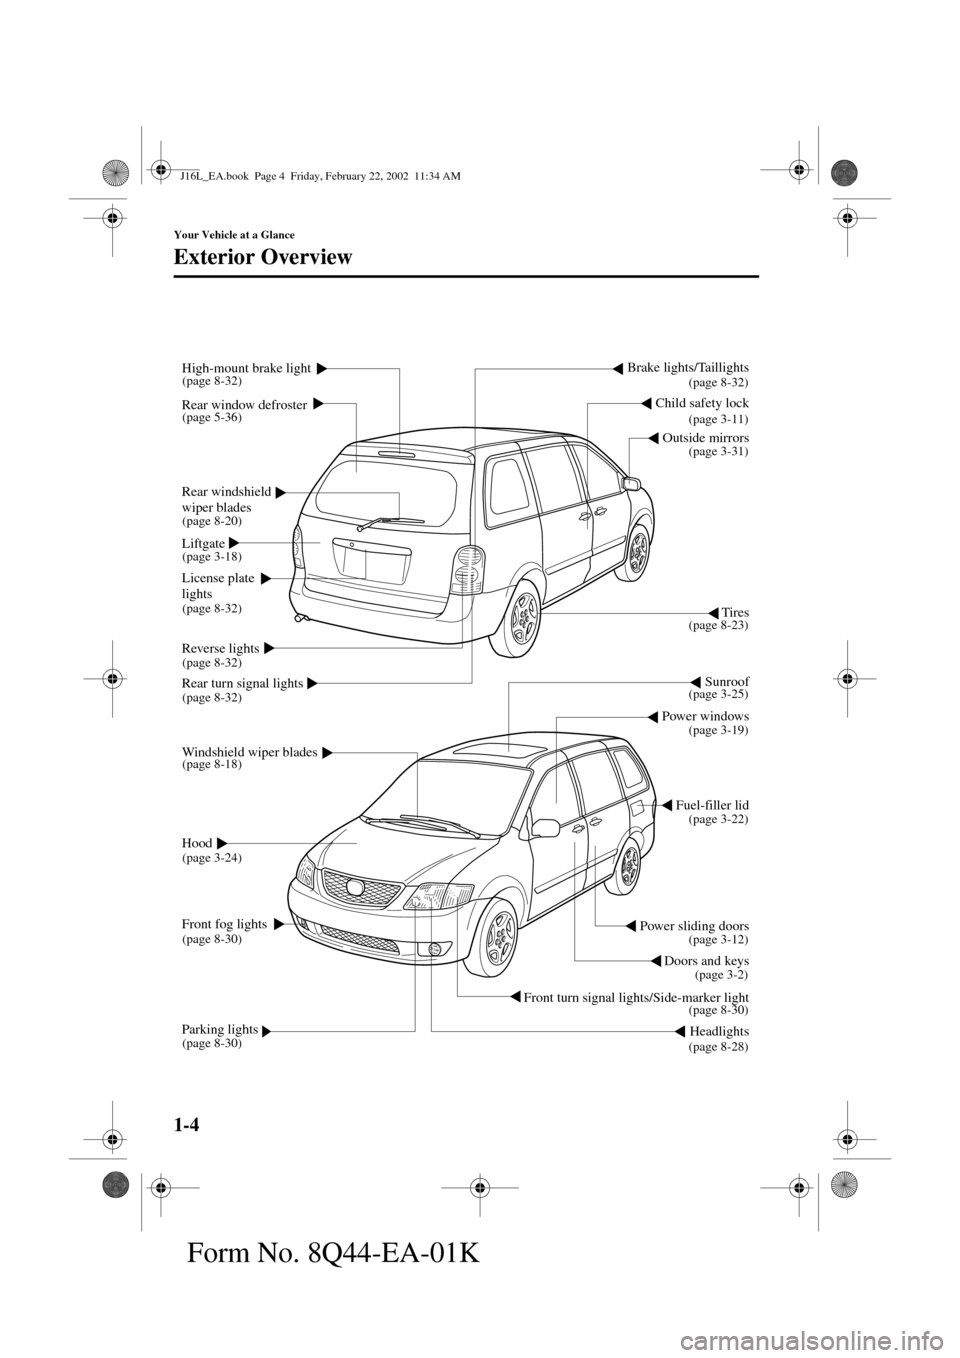 MAZDA MODEL MPV 2002  Owners Manual (in English) 1-4
Your Vehicle at a Glance
Form No. 8Q44-EA-01K
Exterior Overview
Windshield wiper blades
Power windows
Hood
Front fog lights
Front turn signal lights/Side-marker light
Headlights
Fuel-filler lid
Do